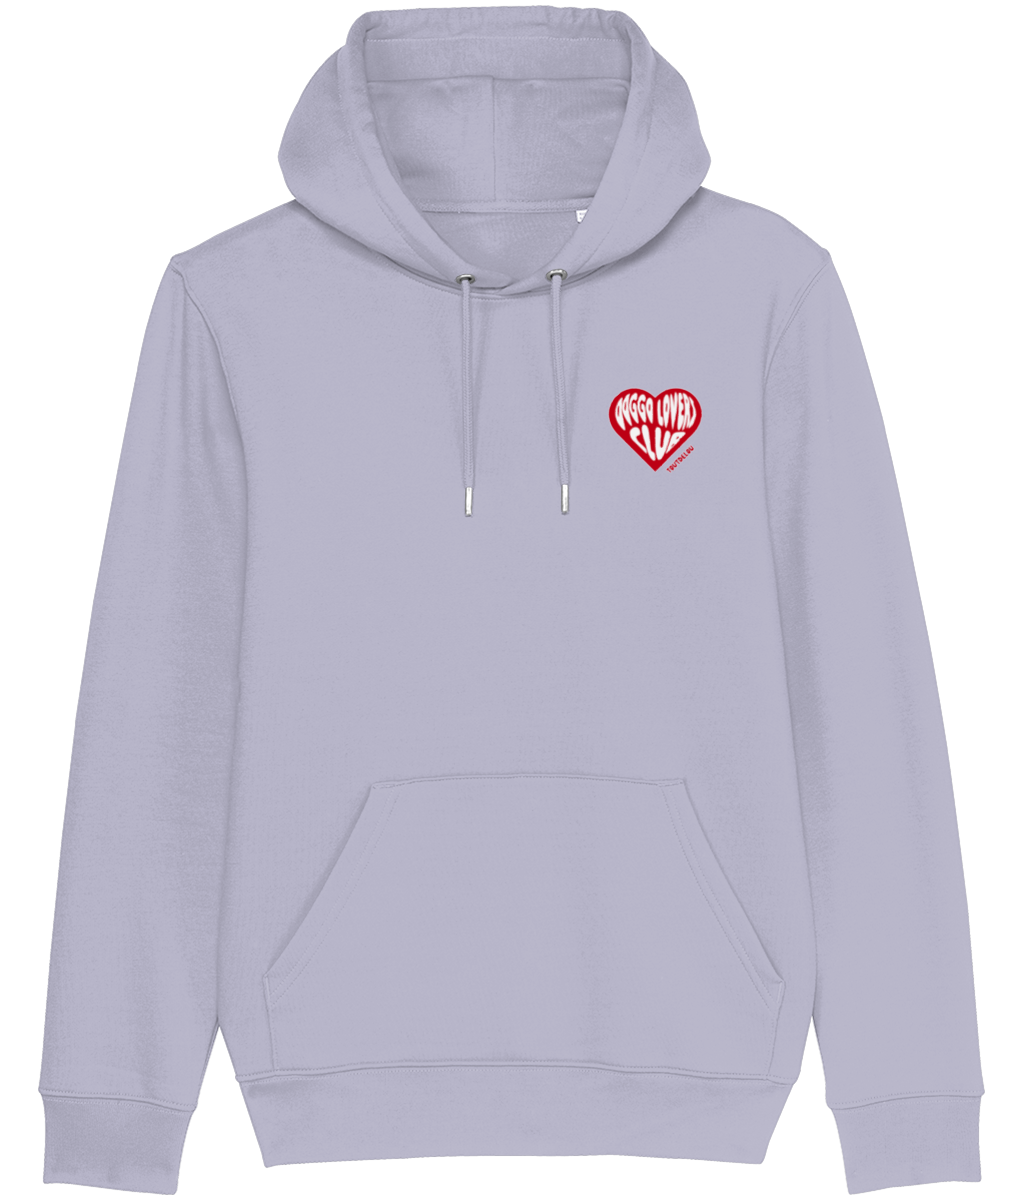 Hoodie -  dog lovers club - front and back